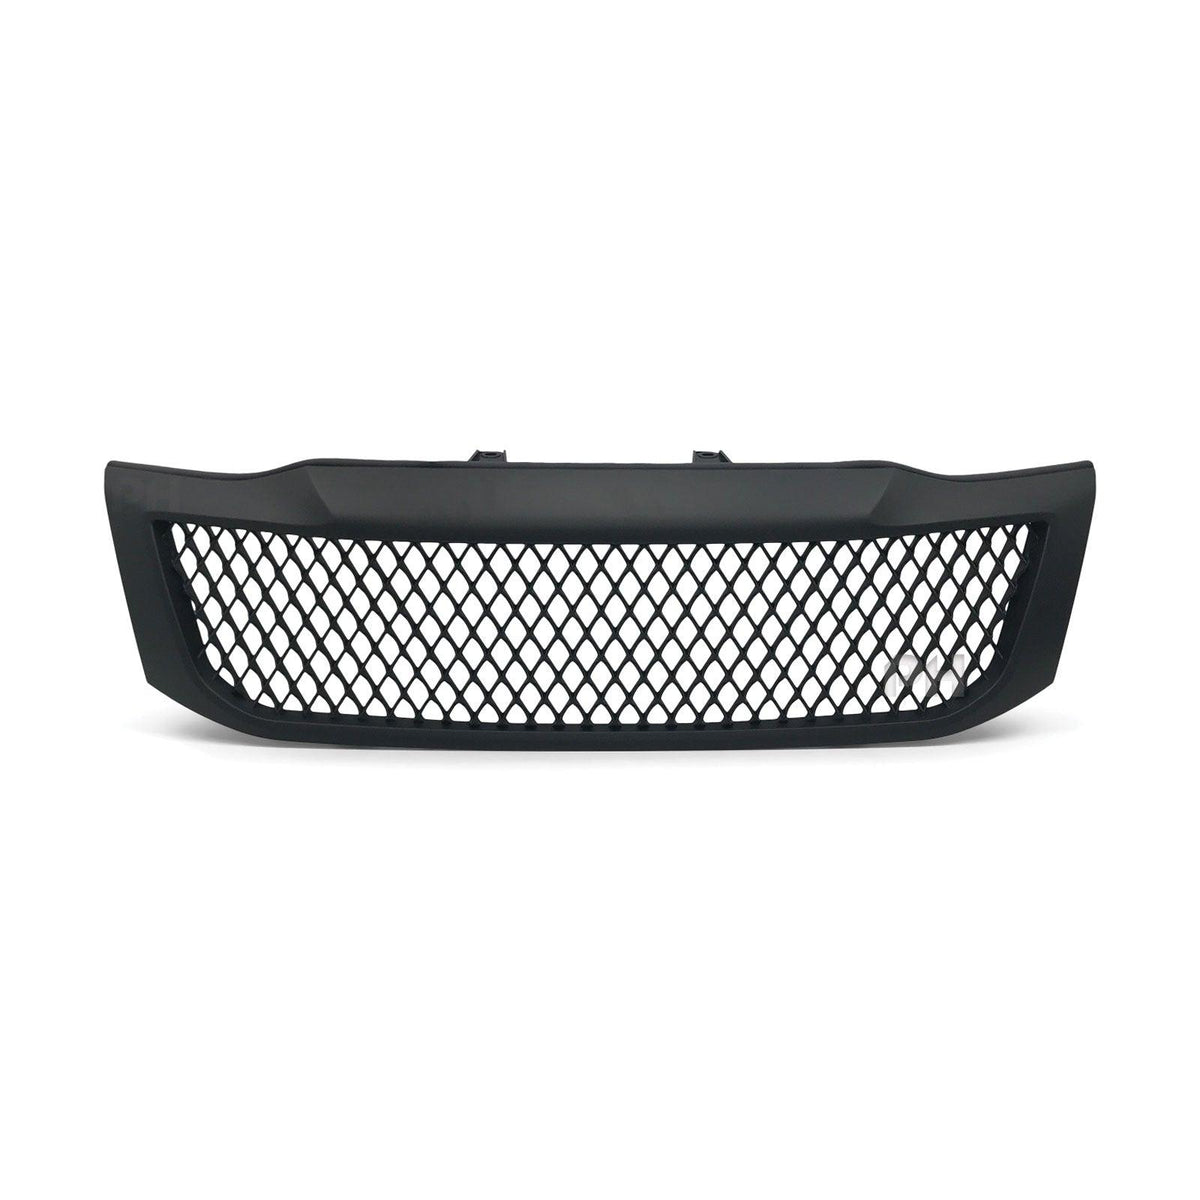 Grill Bentley Style BLACK Edition Fits Toyota Hilux N70 2011-2014 SR5 Workmate - 4X4OC™